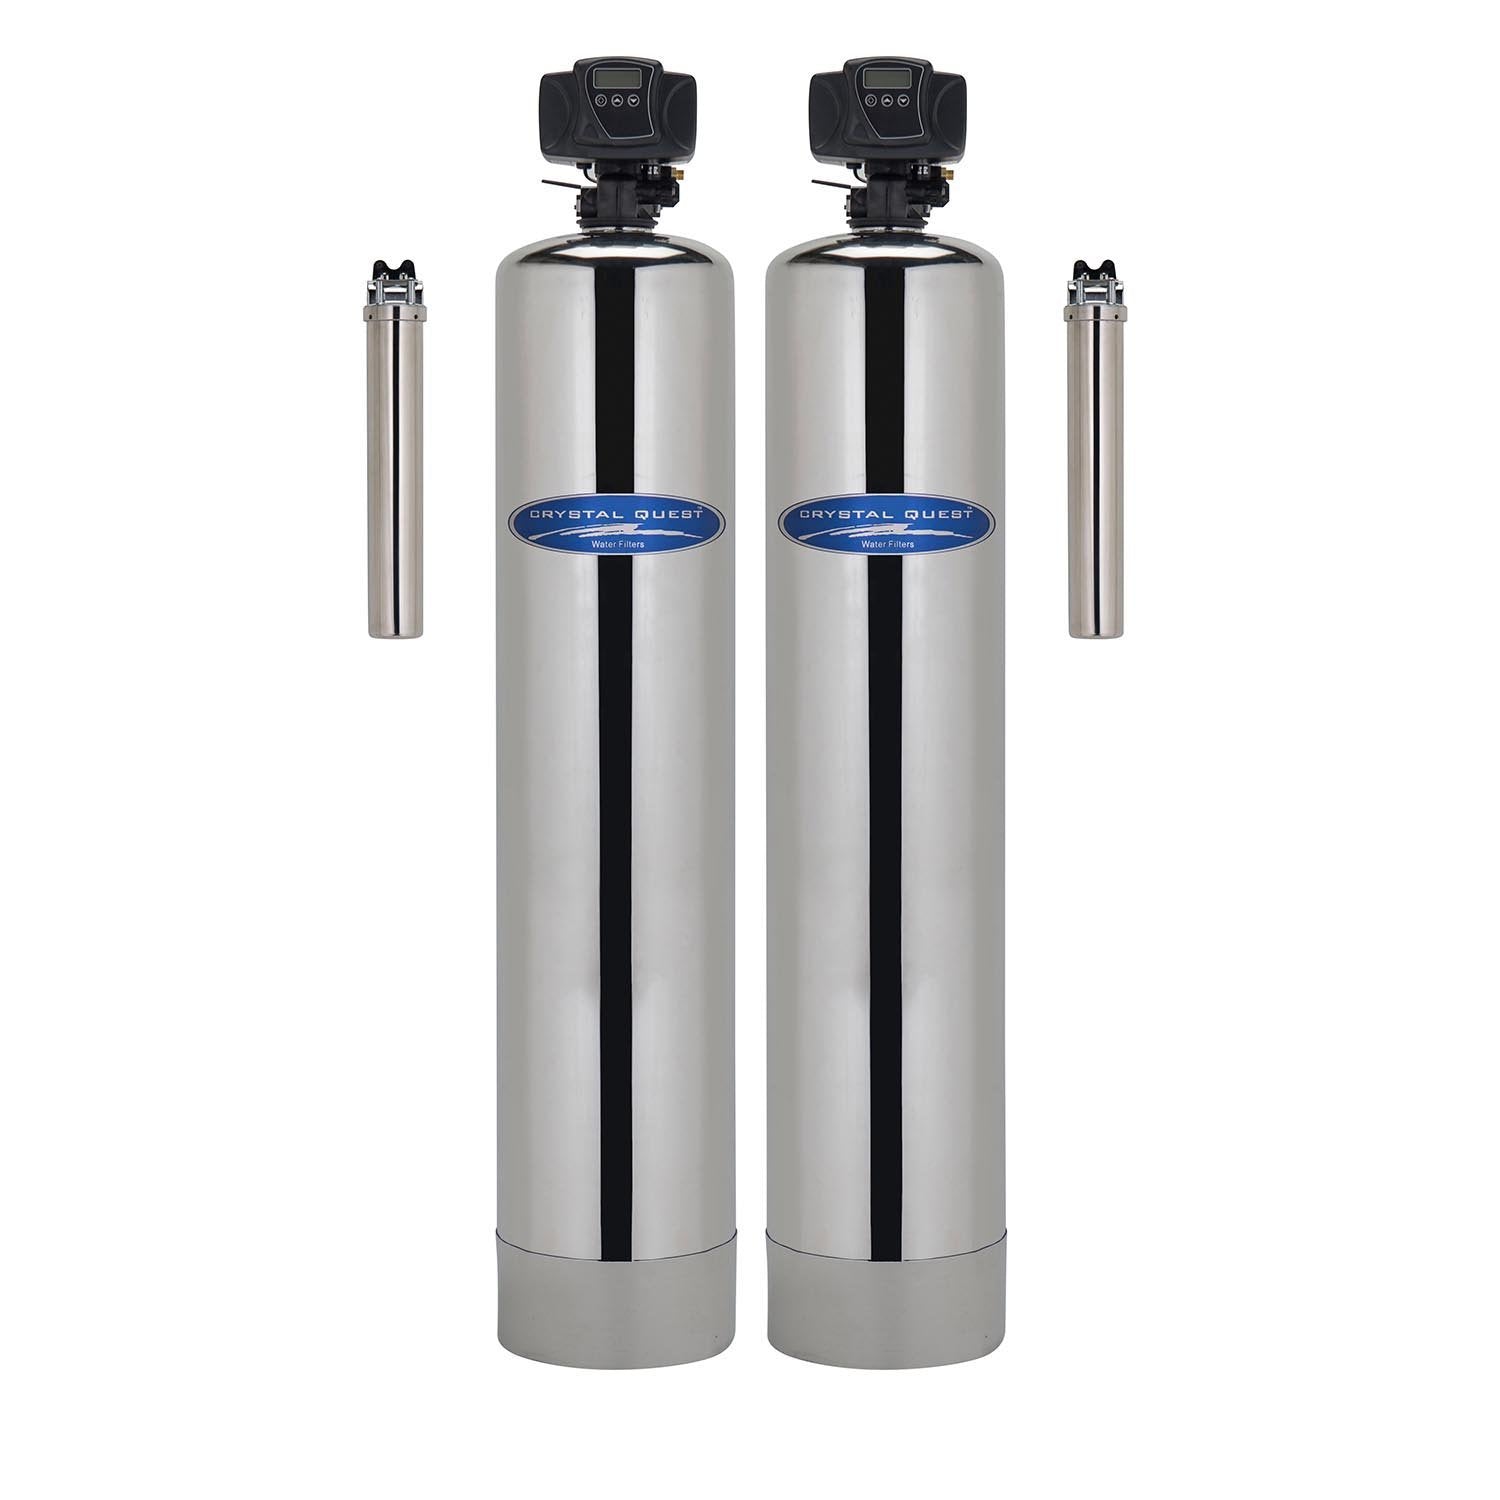 Arsenic Whole House Water Filter - Whole House Water Filters - Crystal Quest Water Filters